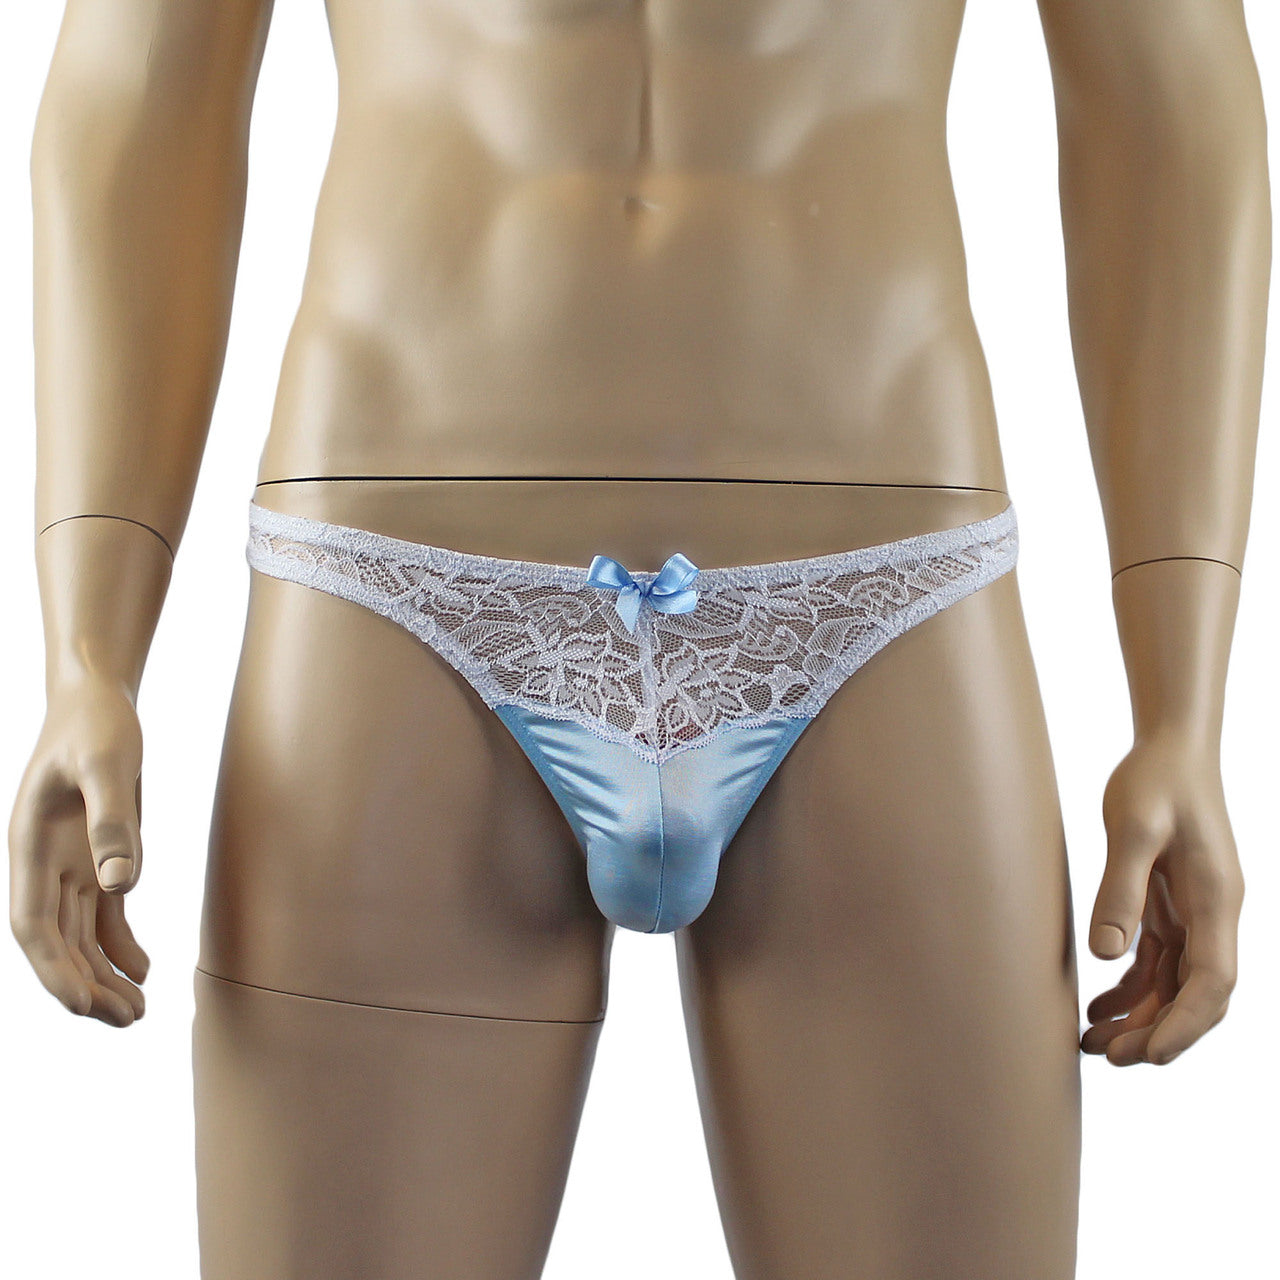 Mens Joanne Underwear Lacey Lovelies Thong Light Blue and White Lace